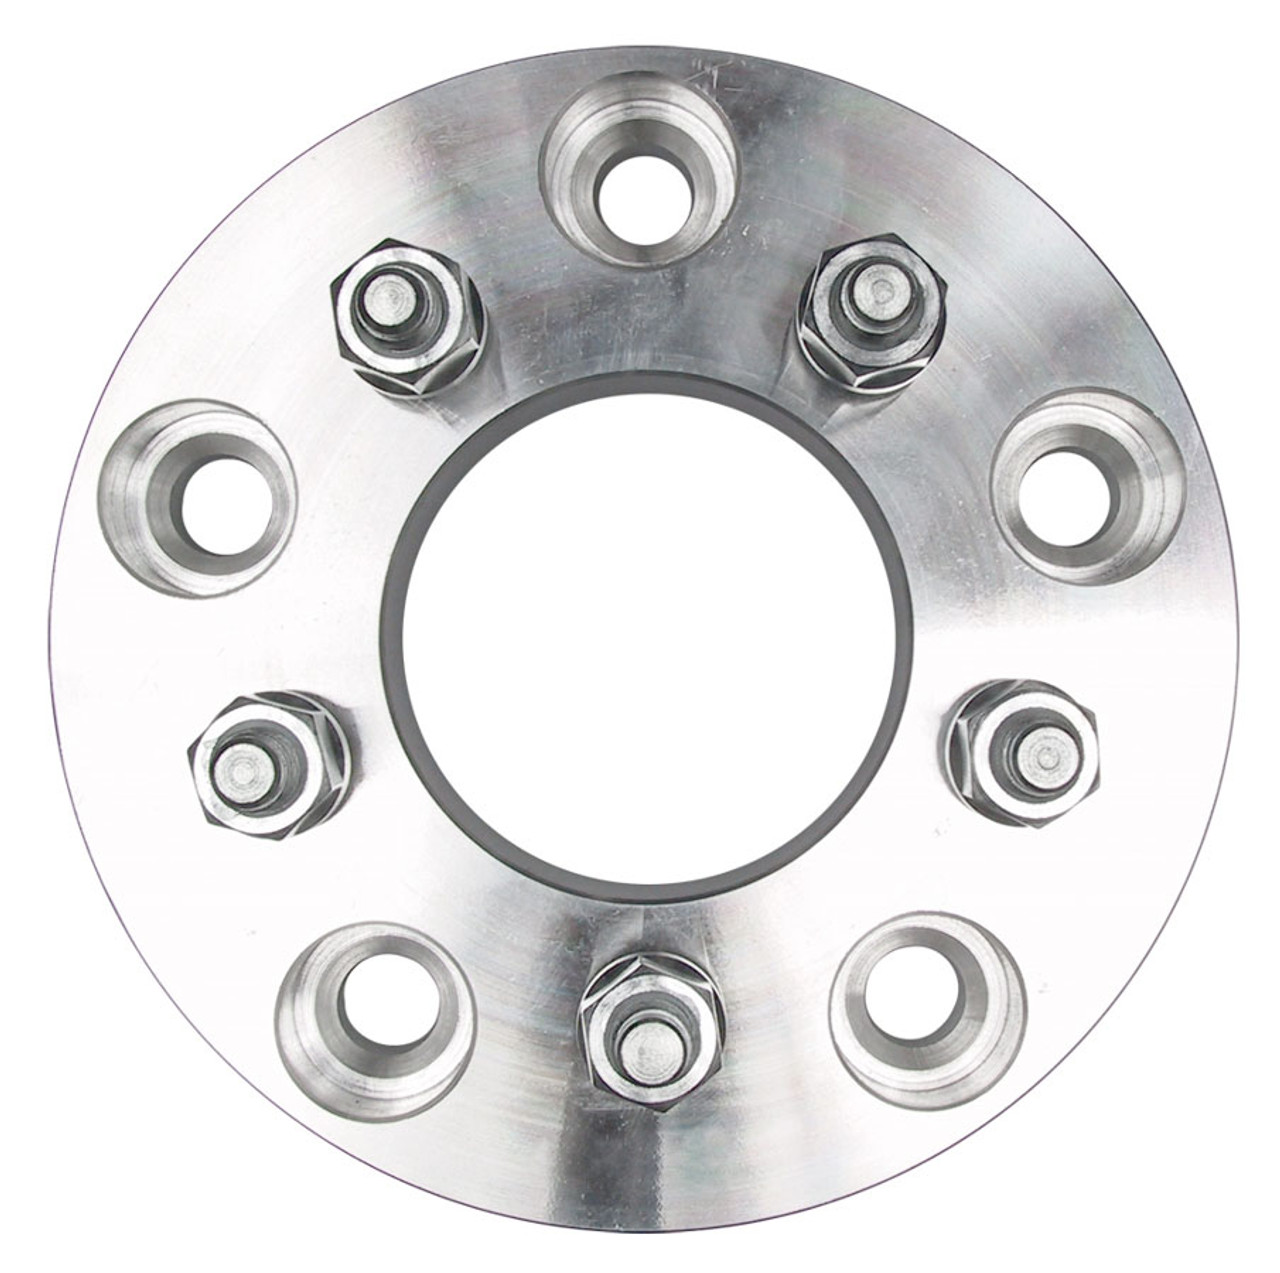 Trans-Dapt Billet Wheel Adapters 5x5.5in to 5x4.5in - TRA3616